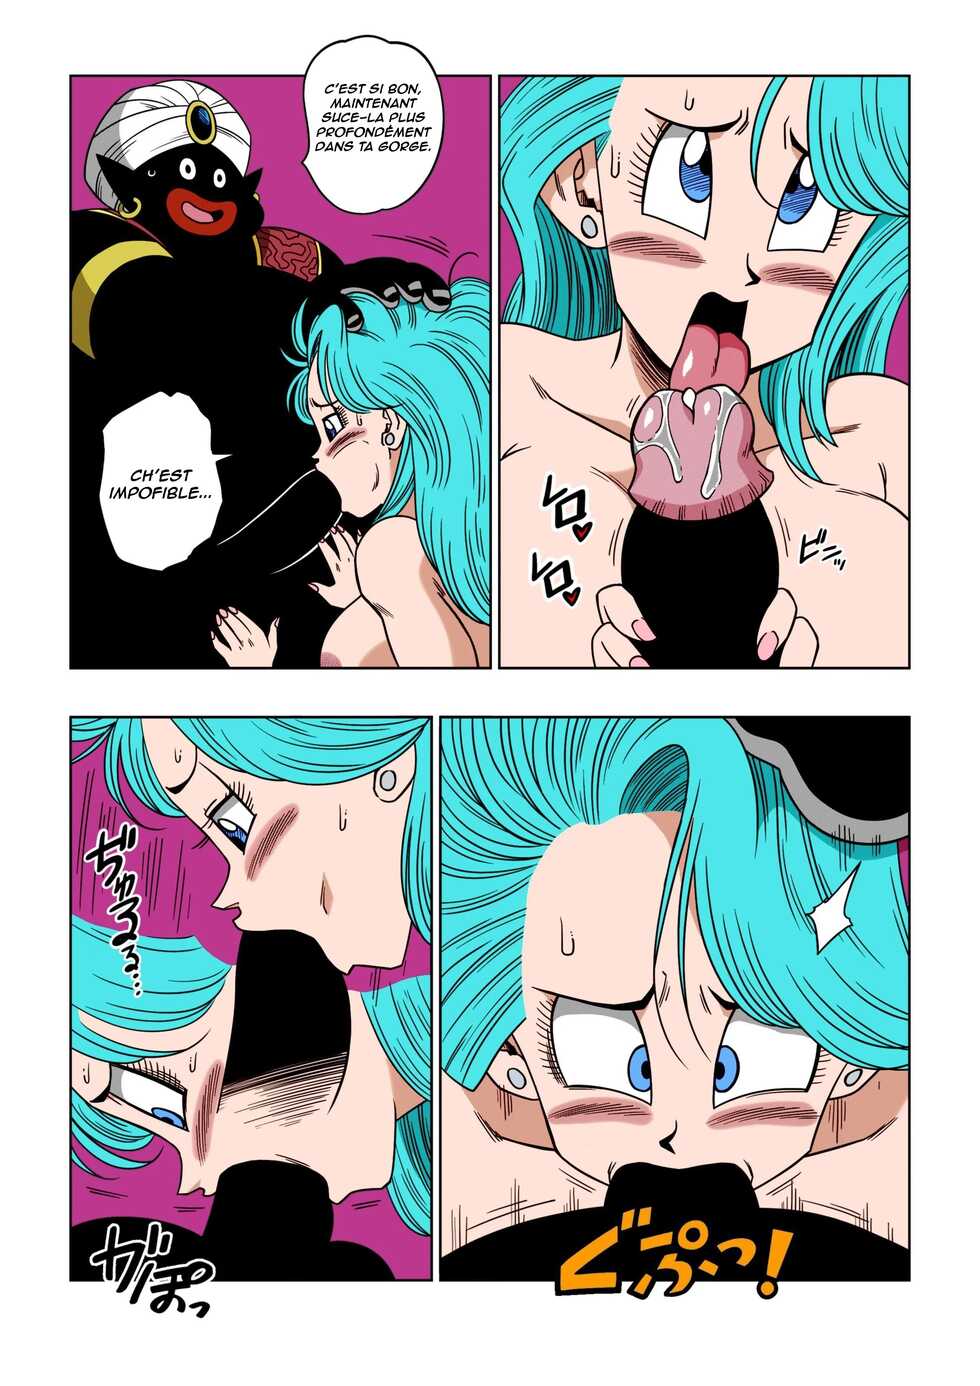 [Yamamoto] Bulma Meets Mr.Popo - Sex inside the Mysterious Spaceship! (Dragon Ball Z) [Uncensored] [FRENCH] [Colorized] - Page 9